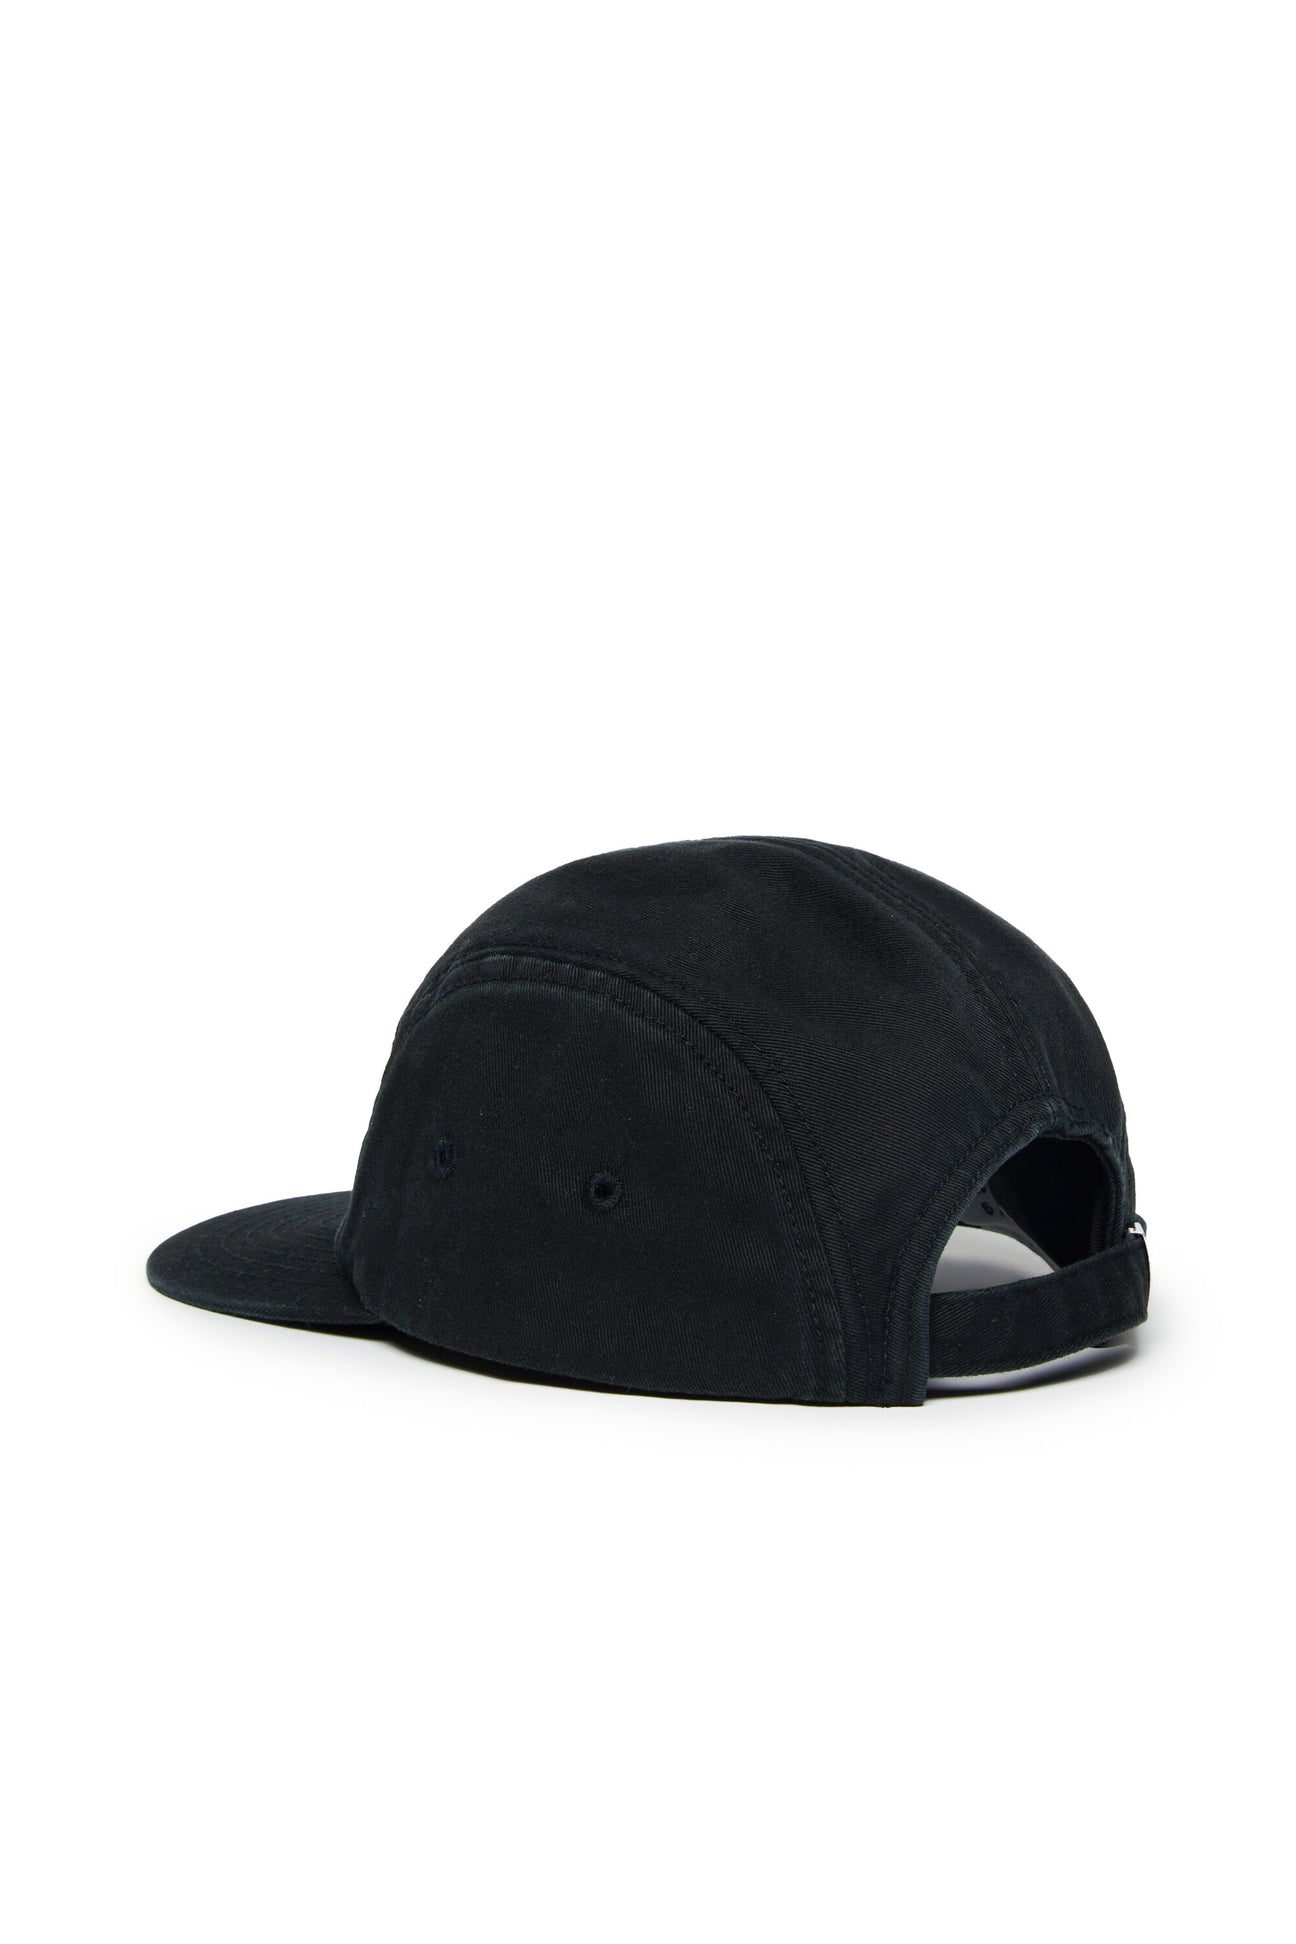 Five-panel hat branded with numeric logo Five-panel hat branded with numeric logo